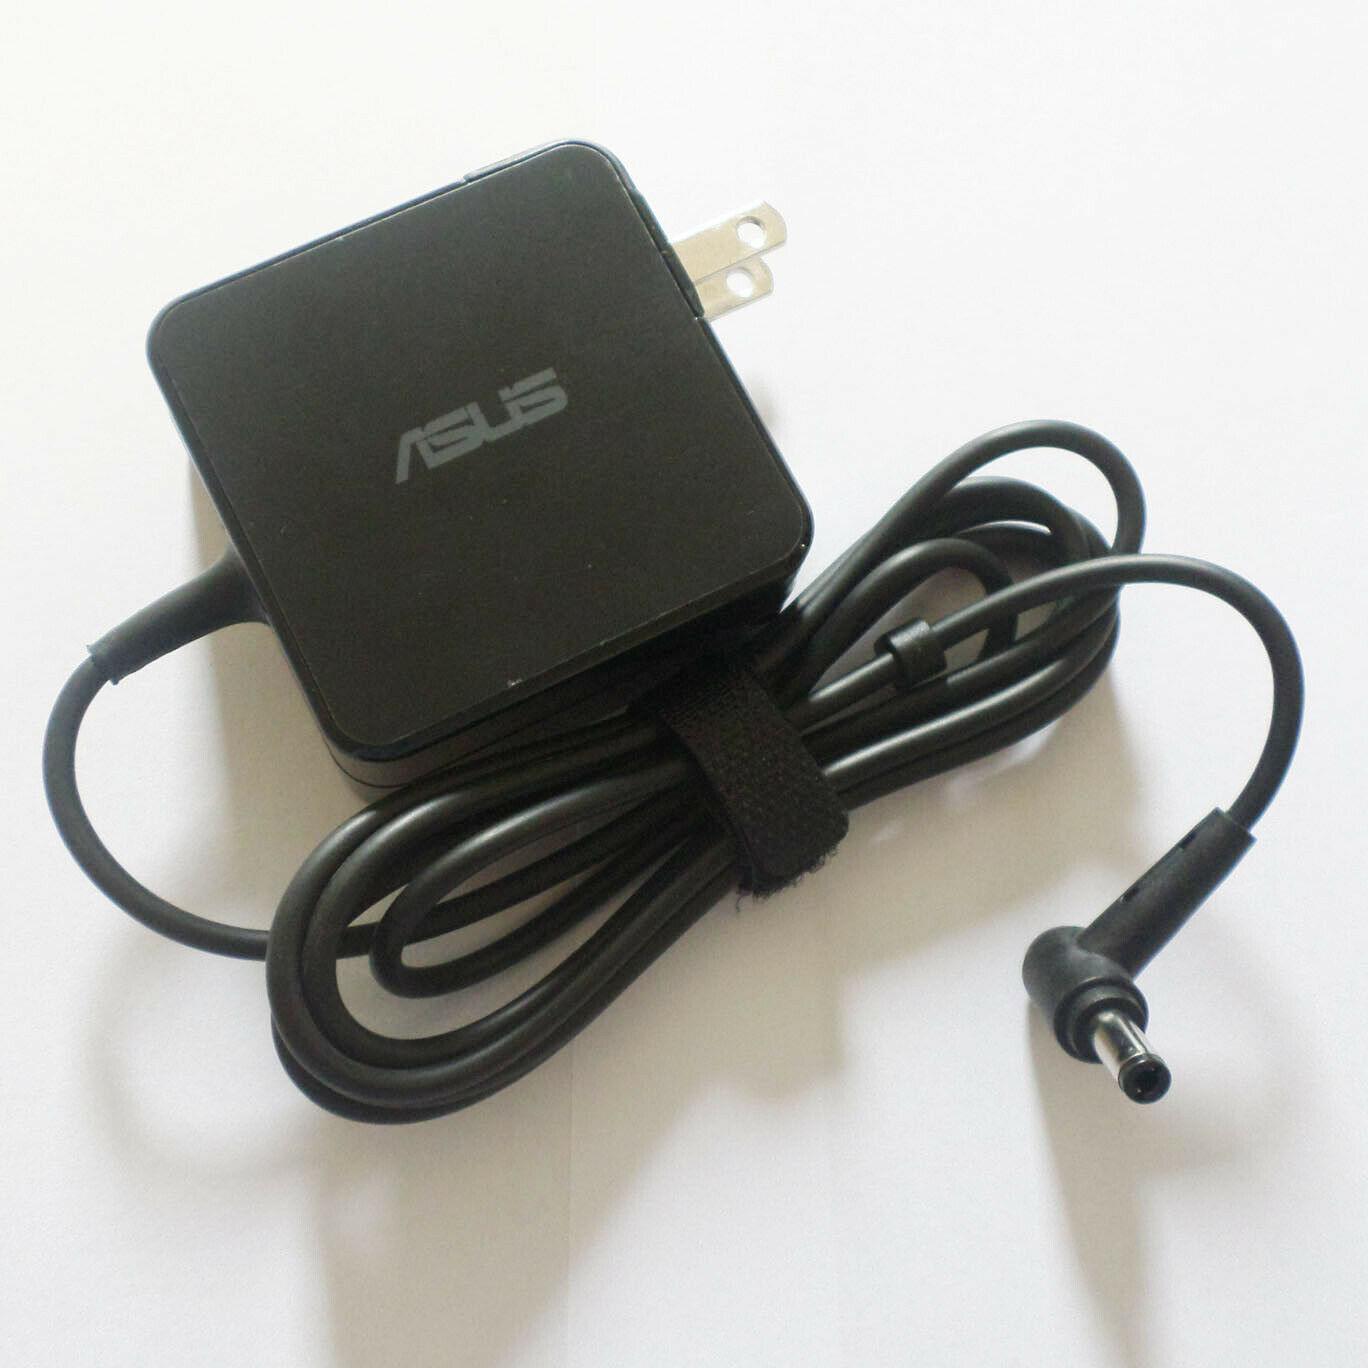 Asus F705M AC Adapter Power Supply Cord Cable Charger Genuine Original